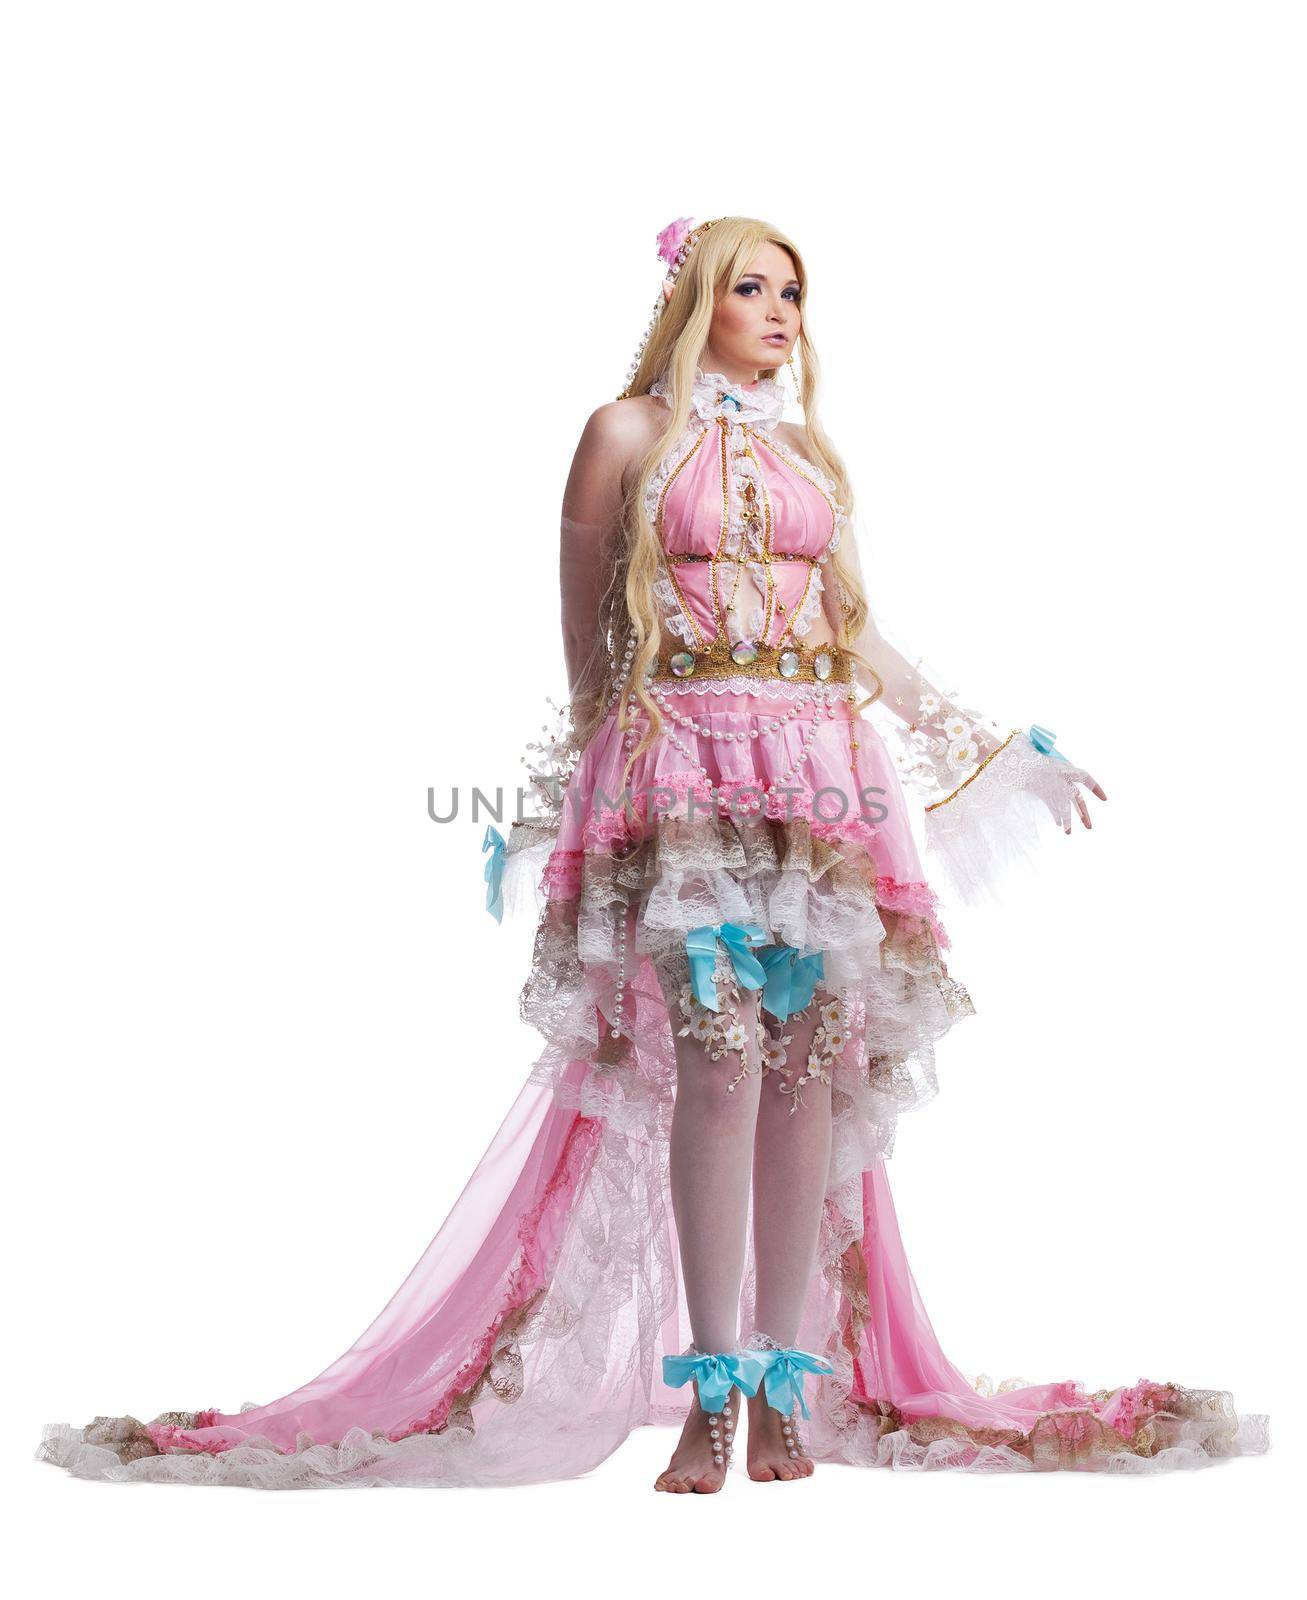 Young girl in fairy-tale doll cosplay costume by rivertime